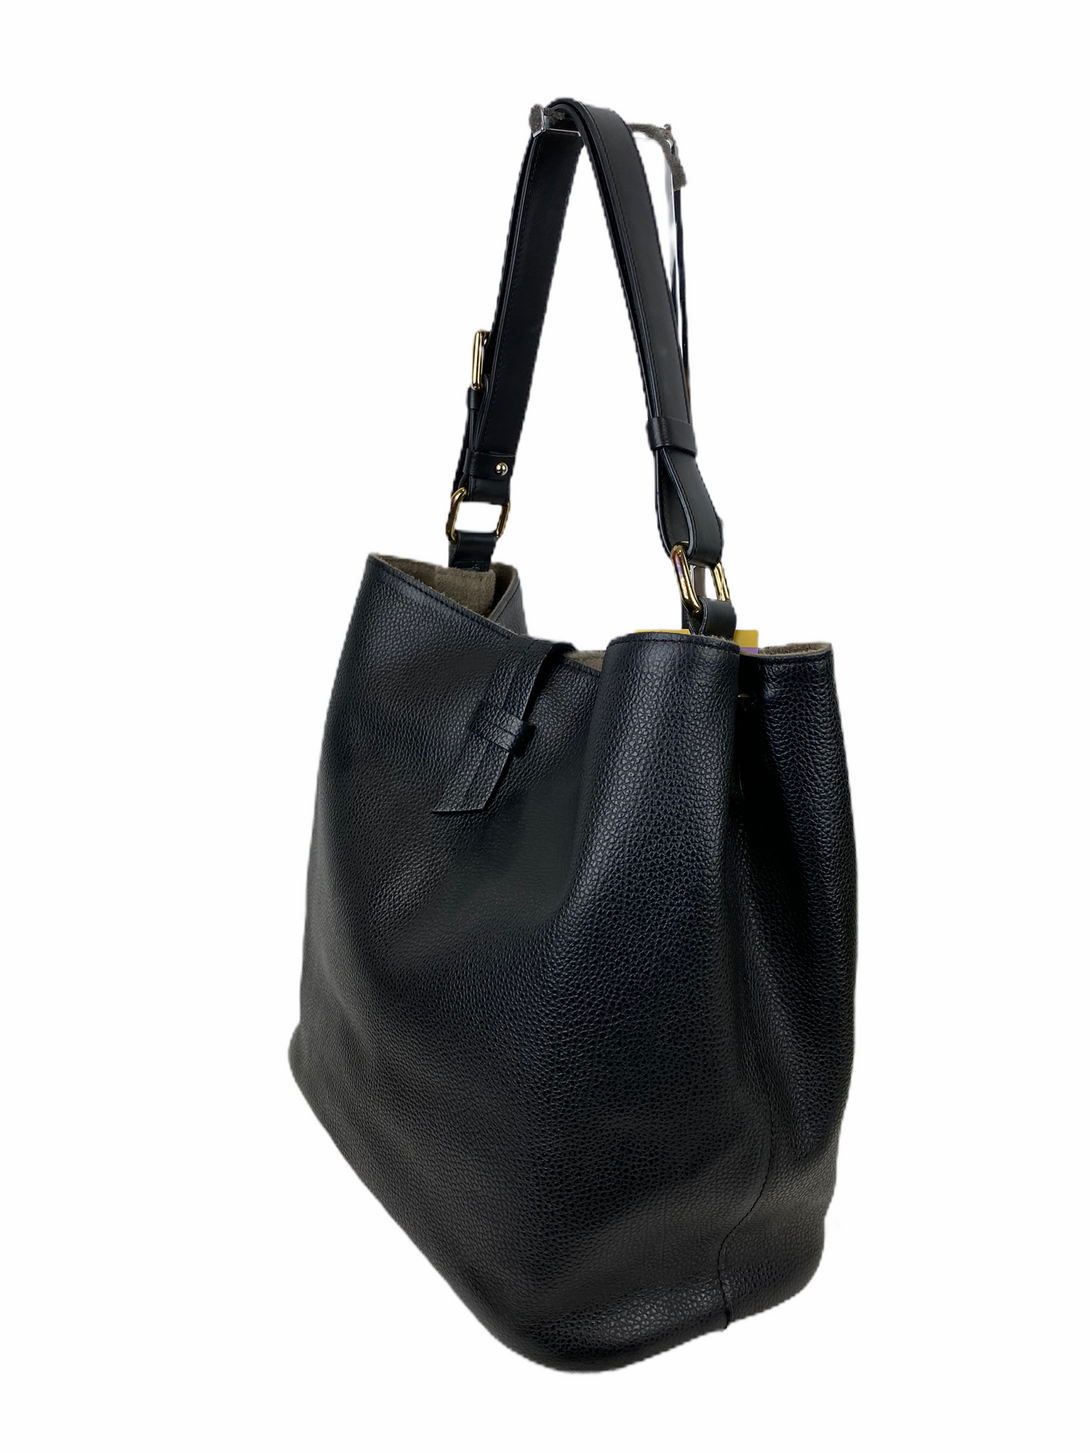 Russell & Bromley Black Leather Hobo - As Seen on Instagram 30/08/2020 - Siopaella Designer Exchange